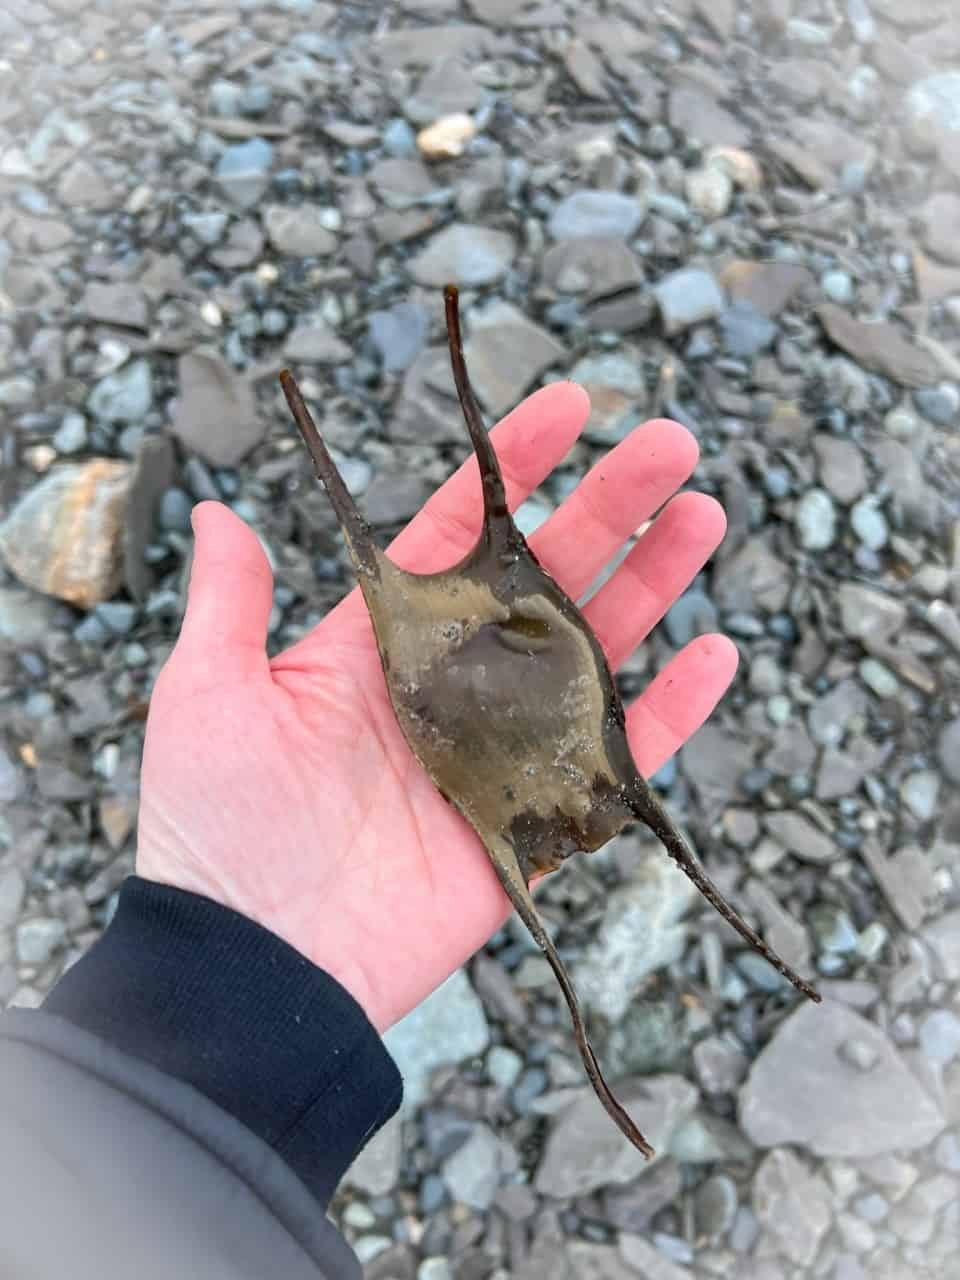 Mermaid’s Purse Found on Topsail Beach Newfoundland  - A “mermaid’s purse” is a tough leathery pouch that protects a developing shark or skate embryo. I found a large quantity of these pouches on the beach.